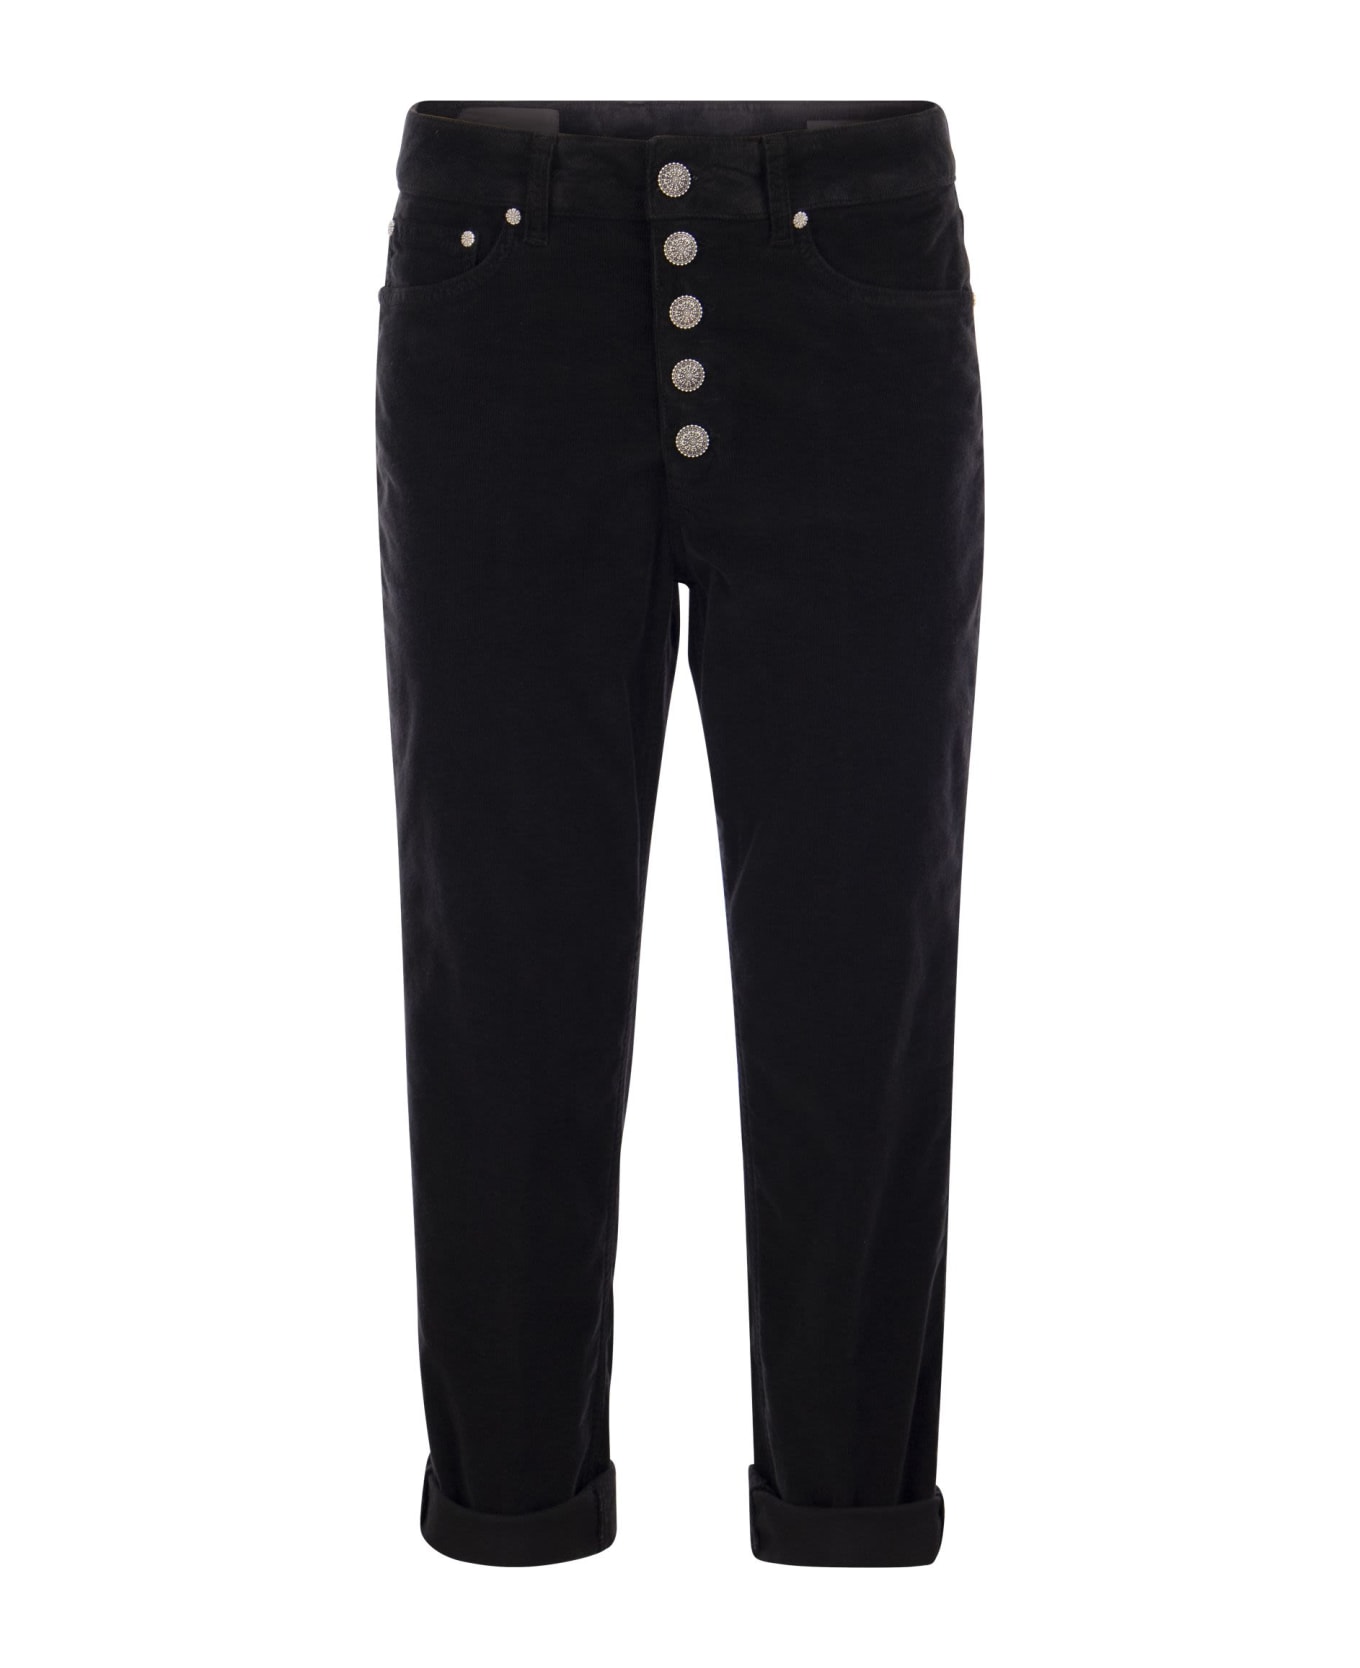 Dondup Koons - Multi-striped Velvet Trousers With Jewelled Buttons - Black デニム